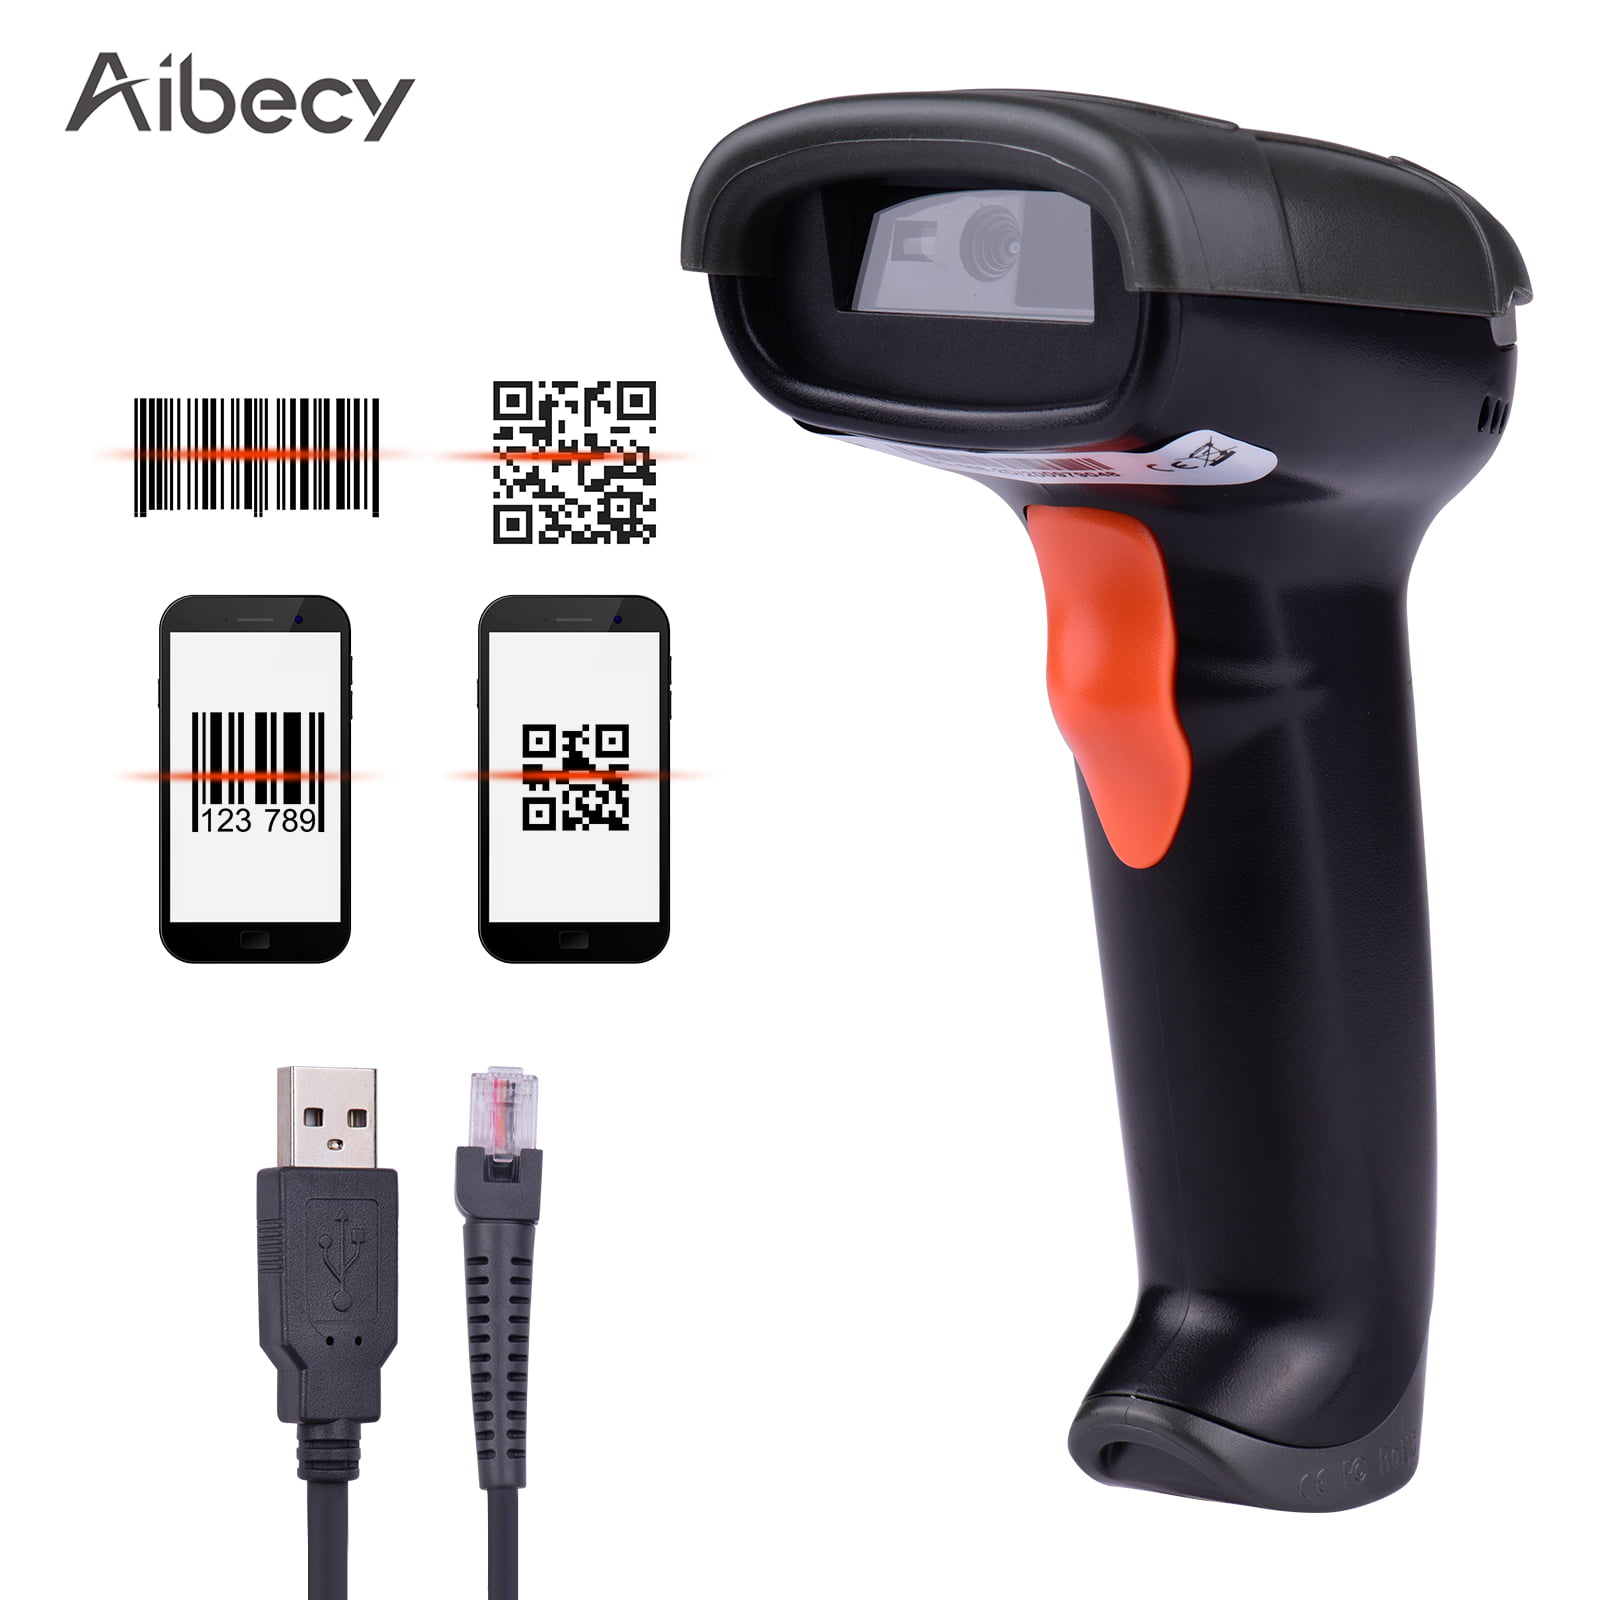 Ktoyols 2D Barcode Scanner Handheld USB Wired Bar Code Reader Manual Trigger//Auto Continuous Scanning Support Paper Code Compatible with Windows Android M-a-c for Supermarket Retail Store Library